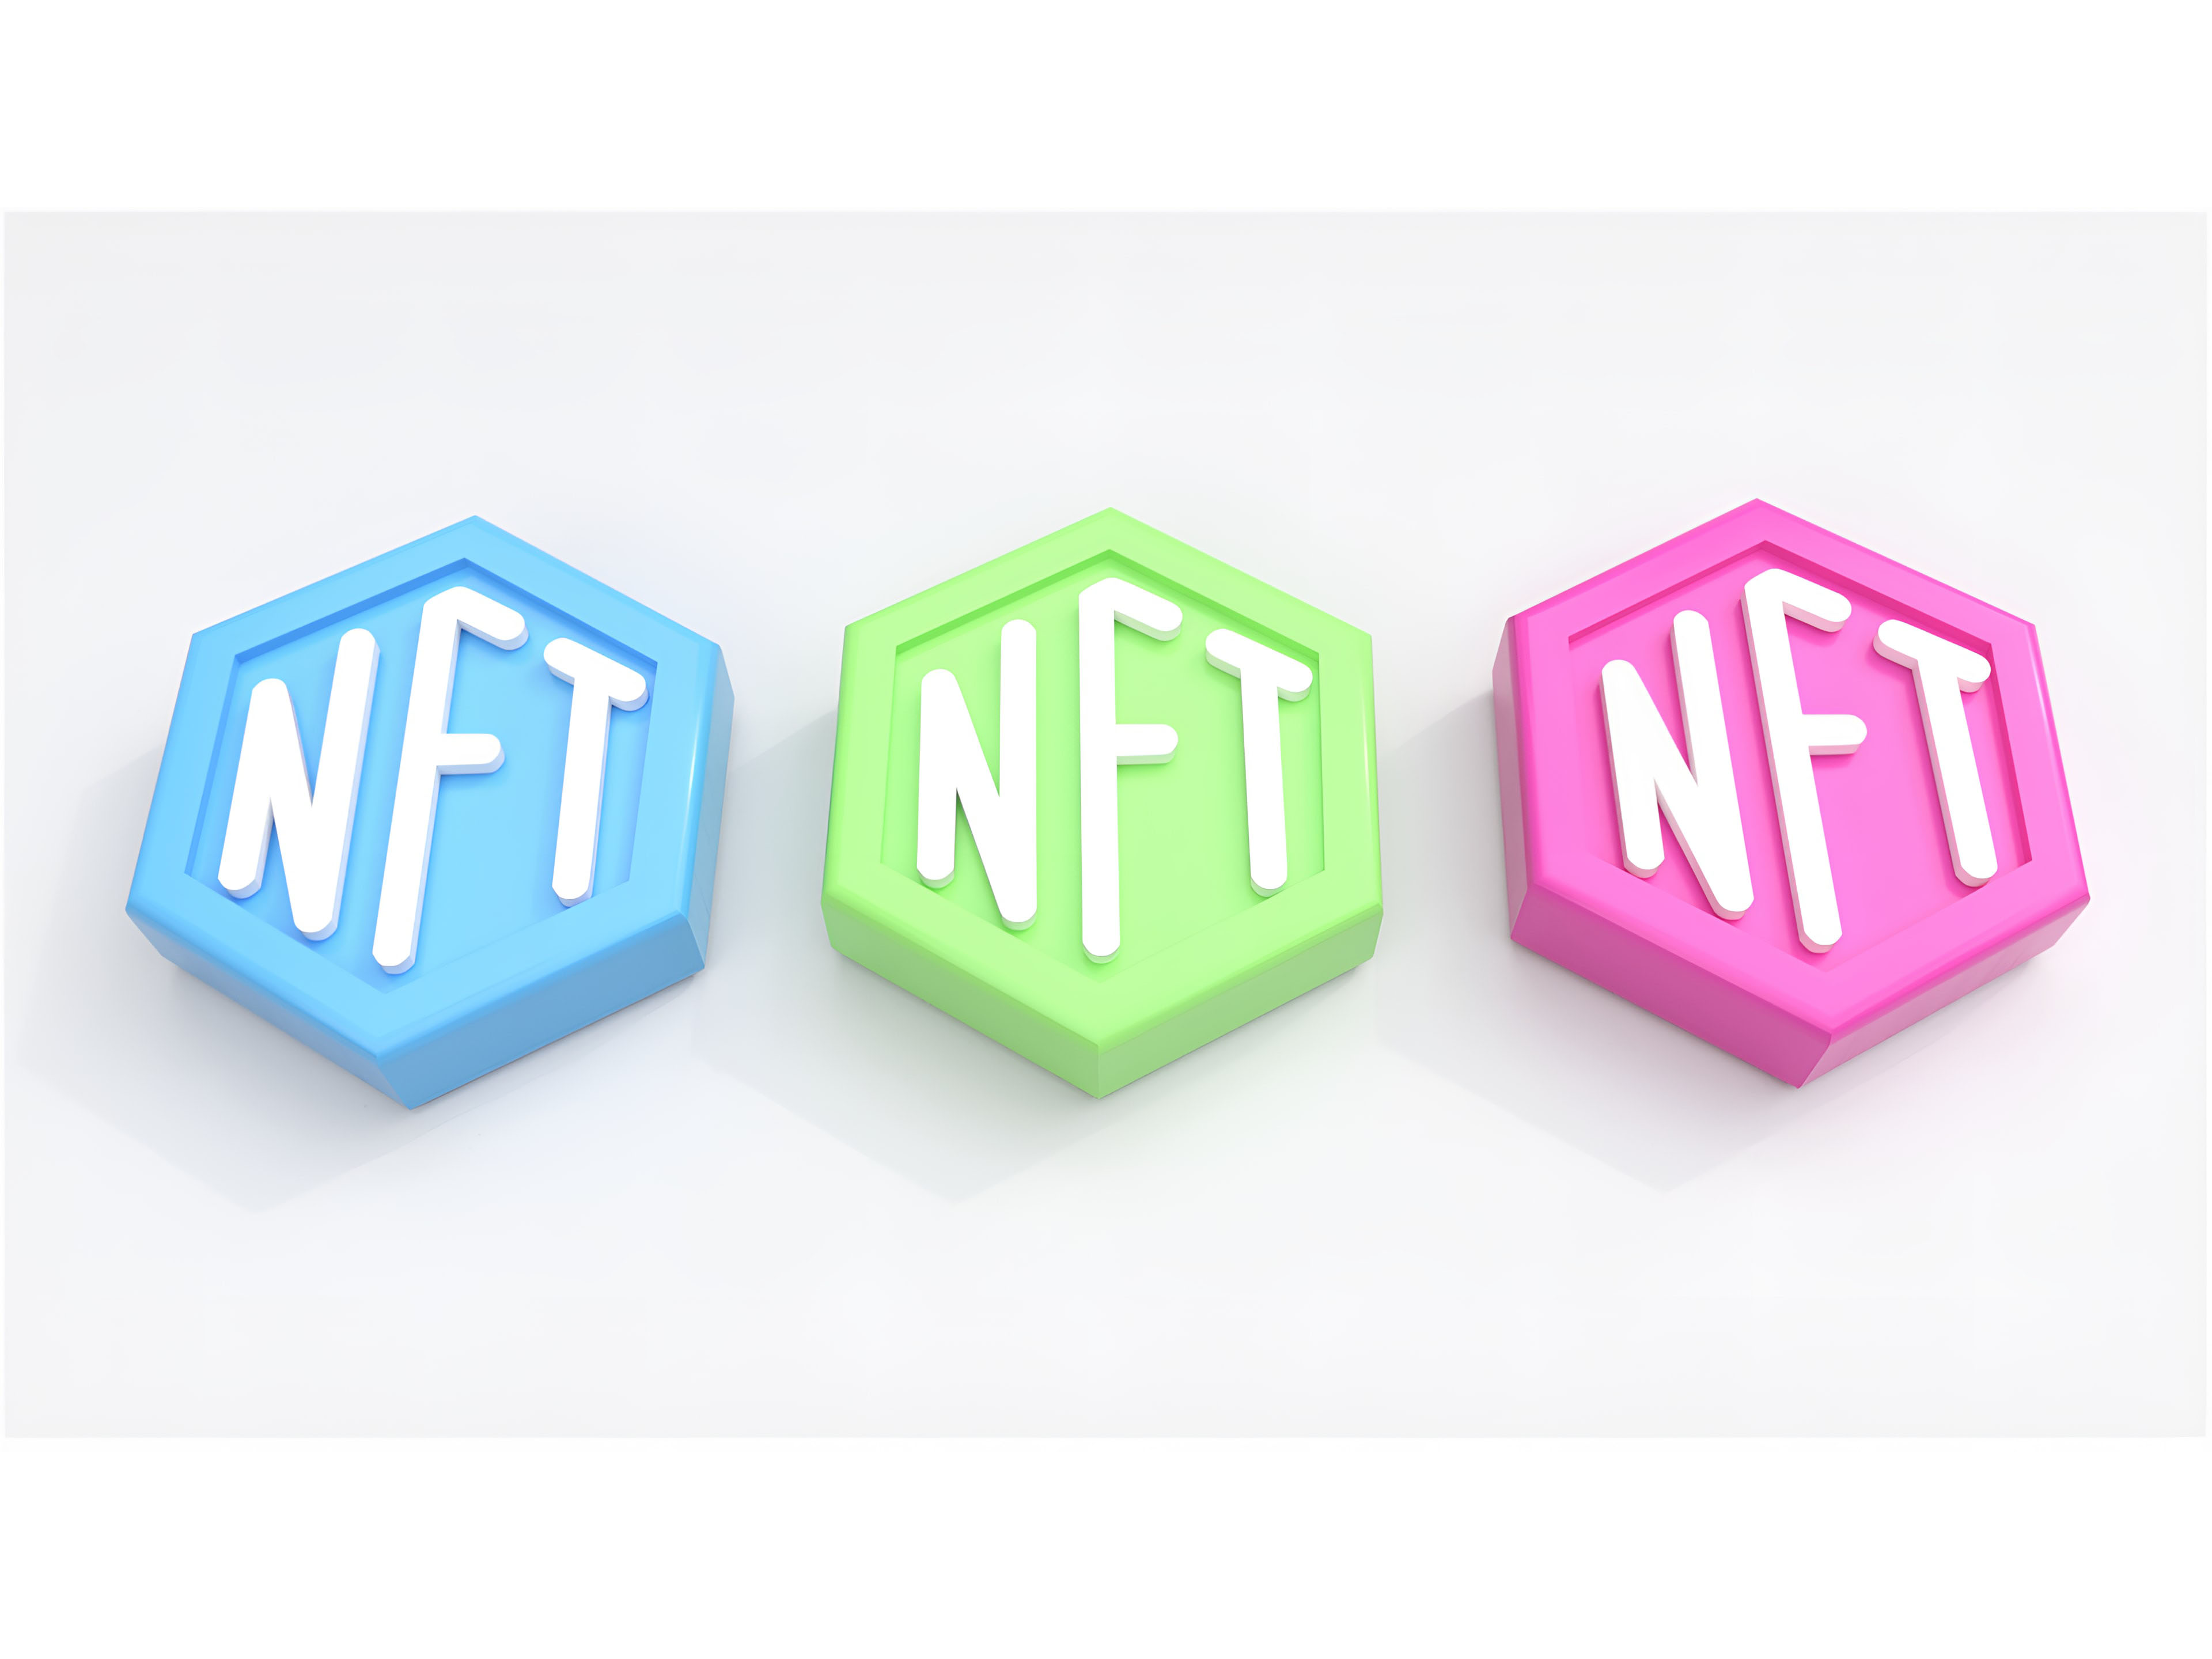 The popularity of NFTs is surging